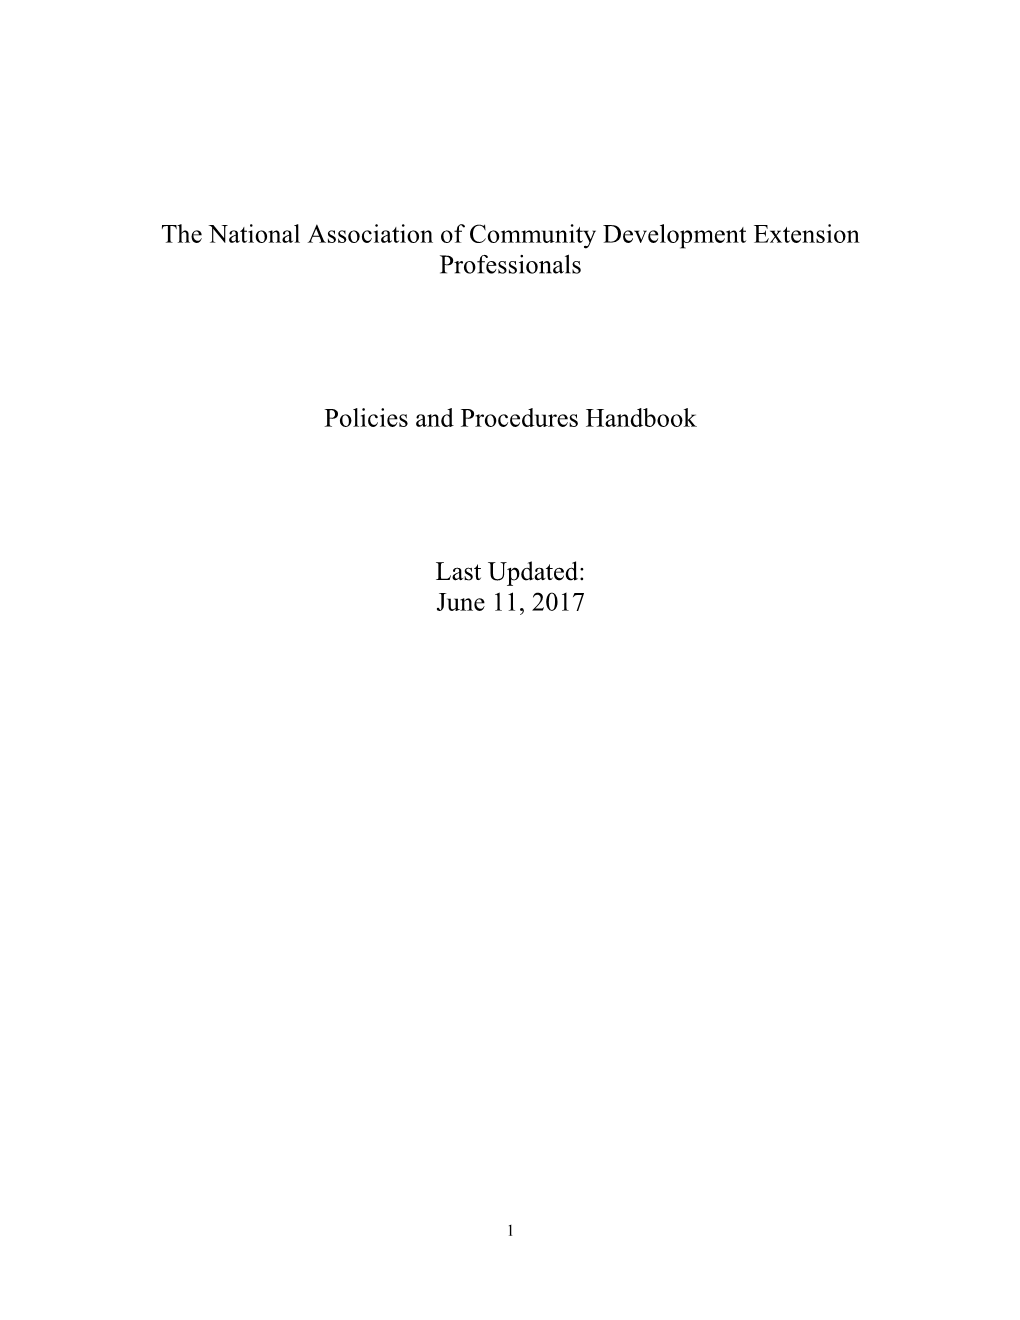 The National Association of Community Development Extension Professionals Policies and Procedures Handbook Last Updated